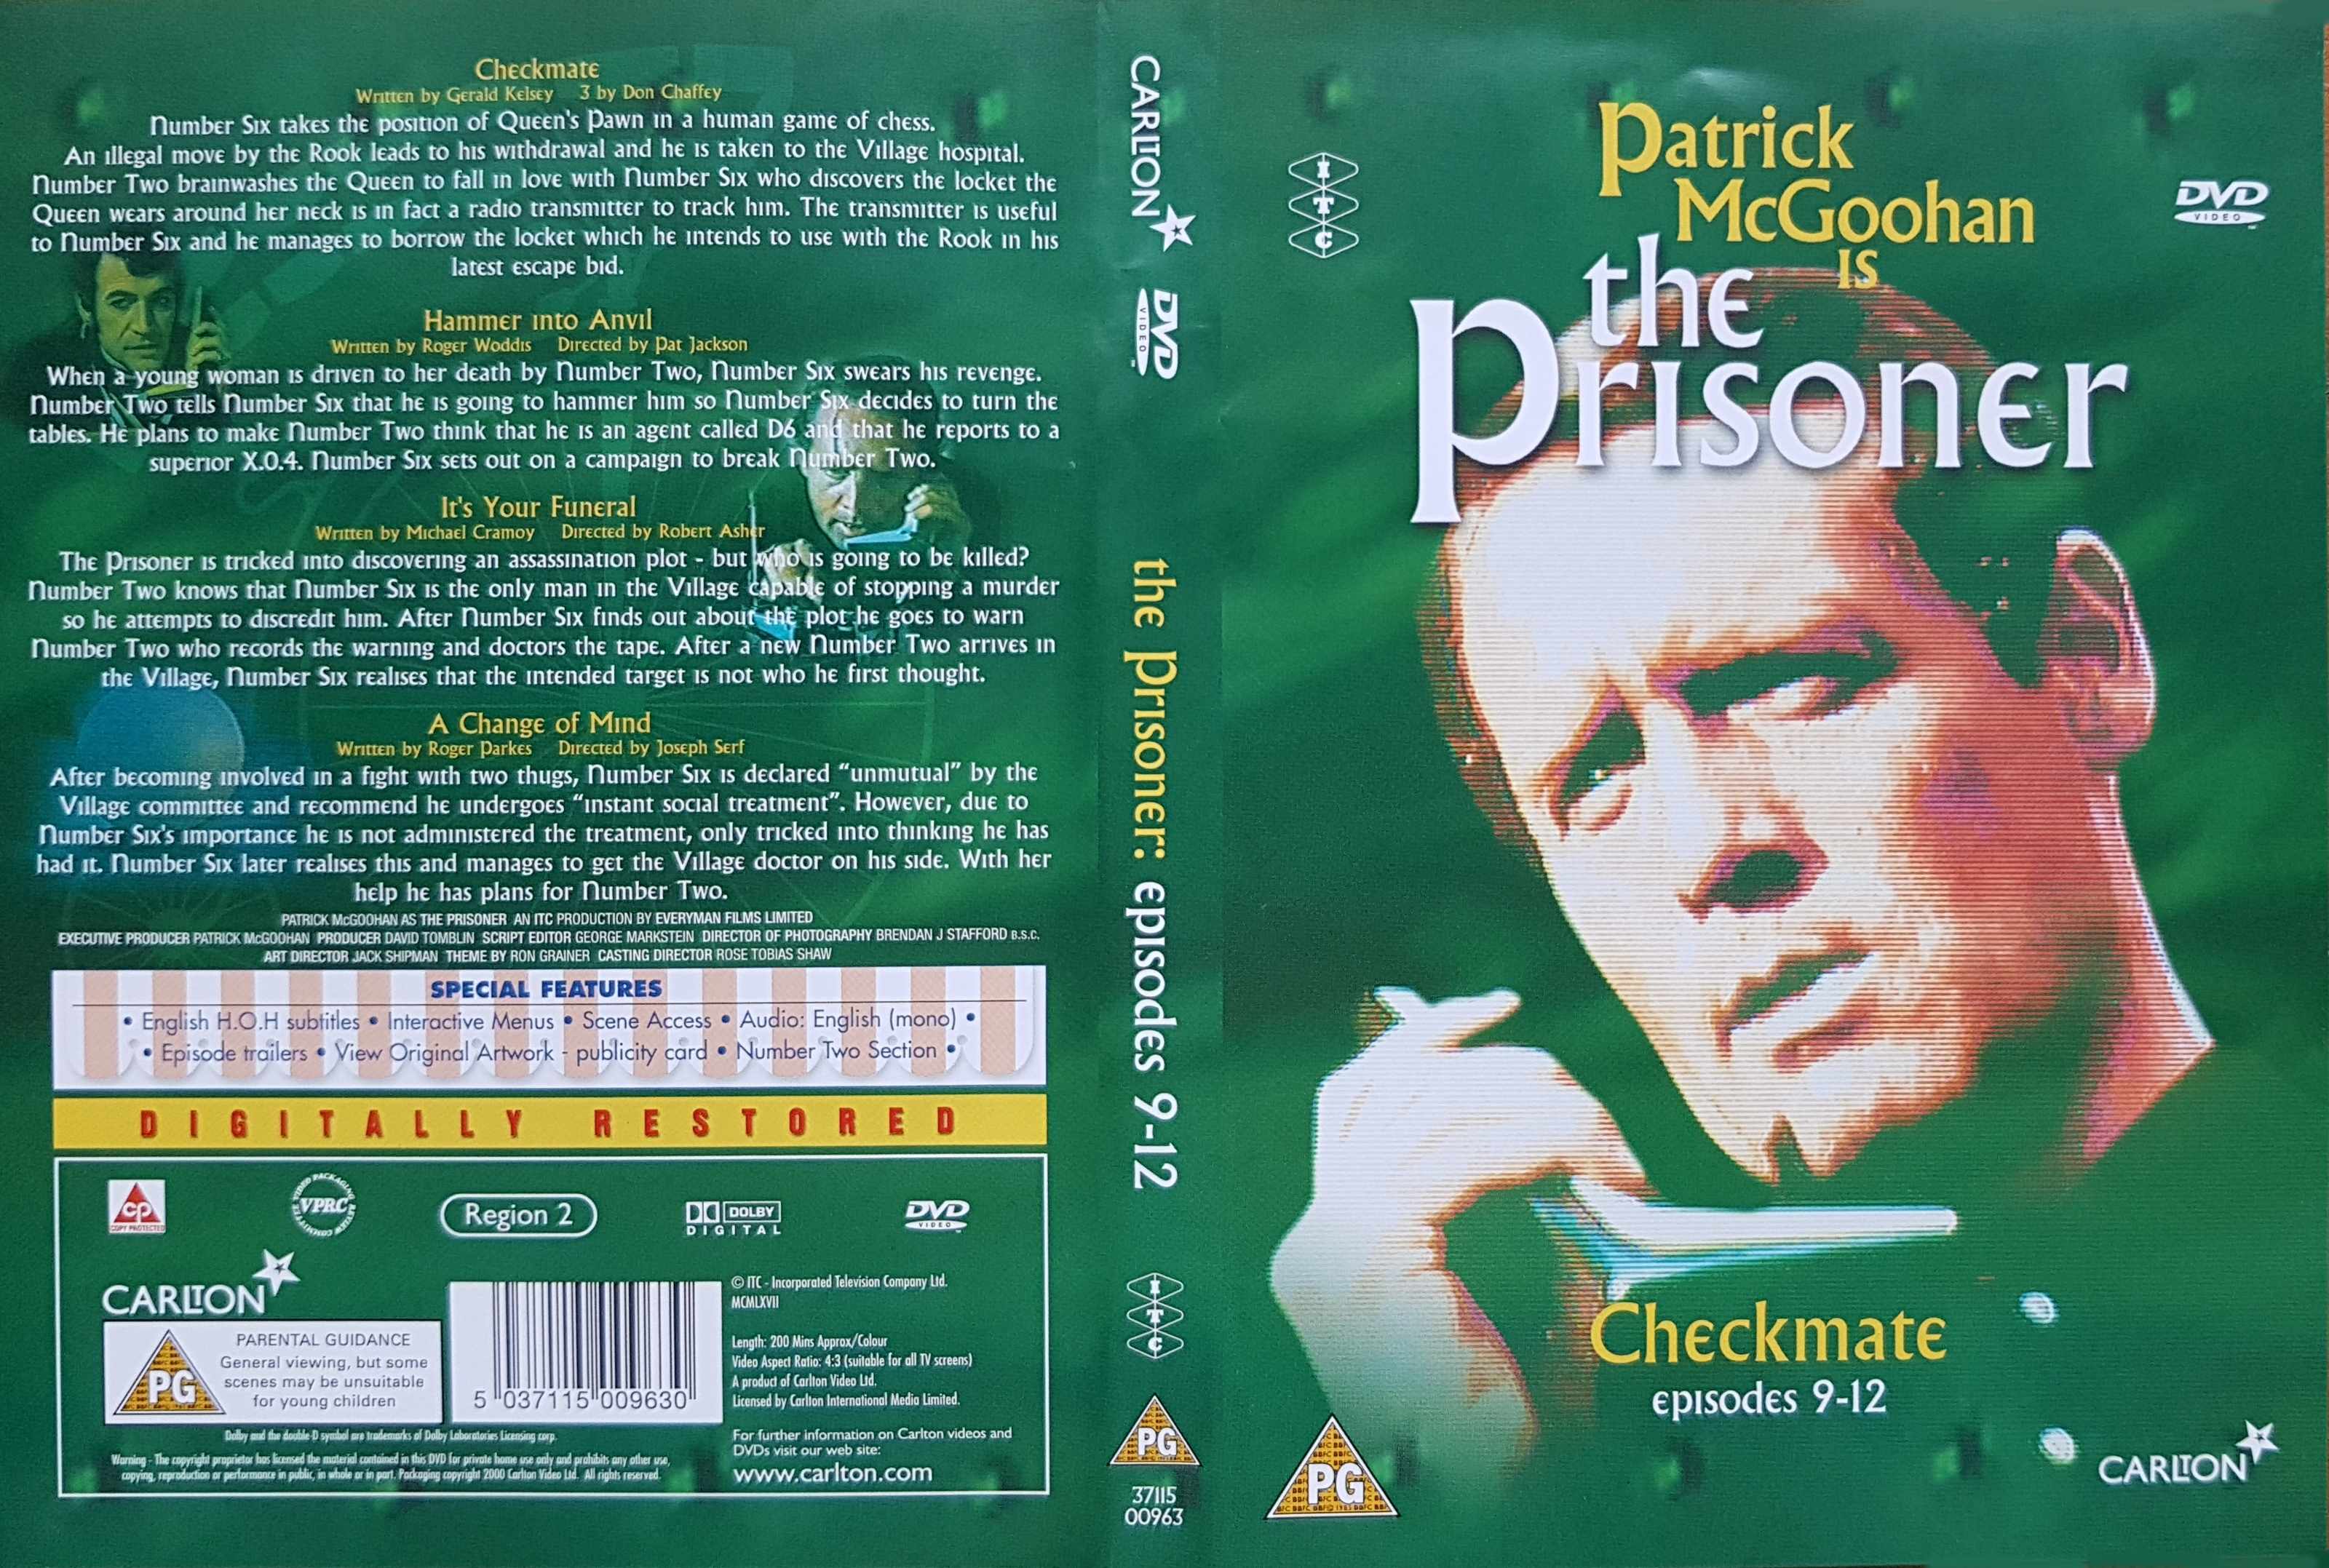 Picture of 37115 00963 The prisoner - Episodes 9 - 12 by artist Various from ITV, Channel 4 and Channel 5 library